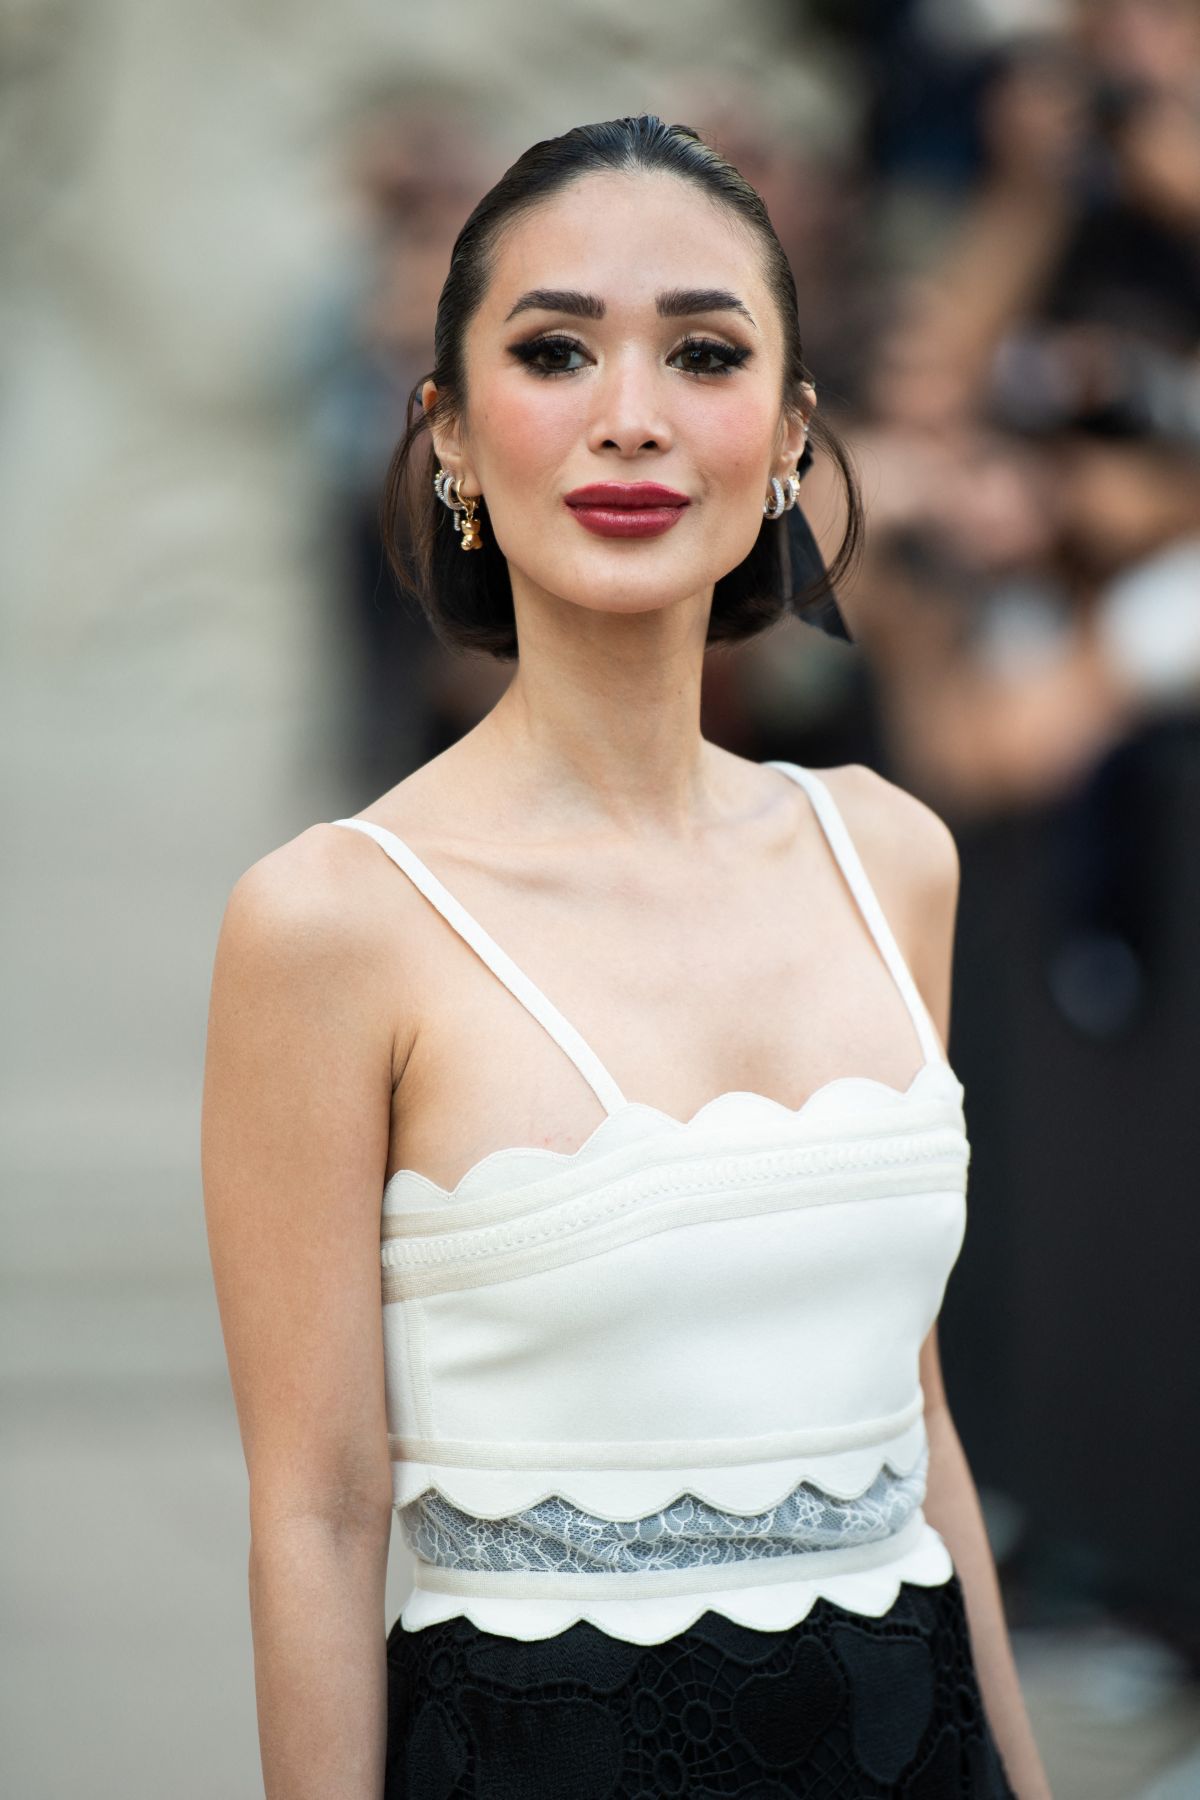 Heart Evangelista attends the Elie Saab Haute Couture Fall-Winter 2023-24  show during Paris Fashion Week in Paris, France-050723_4